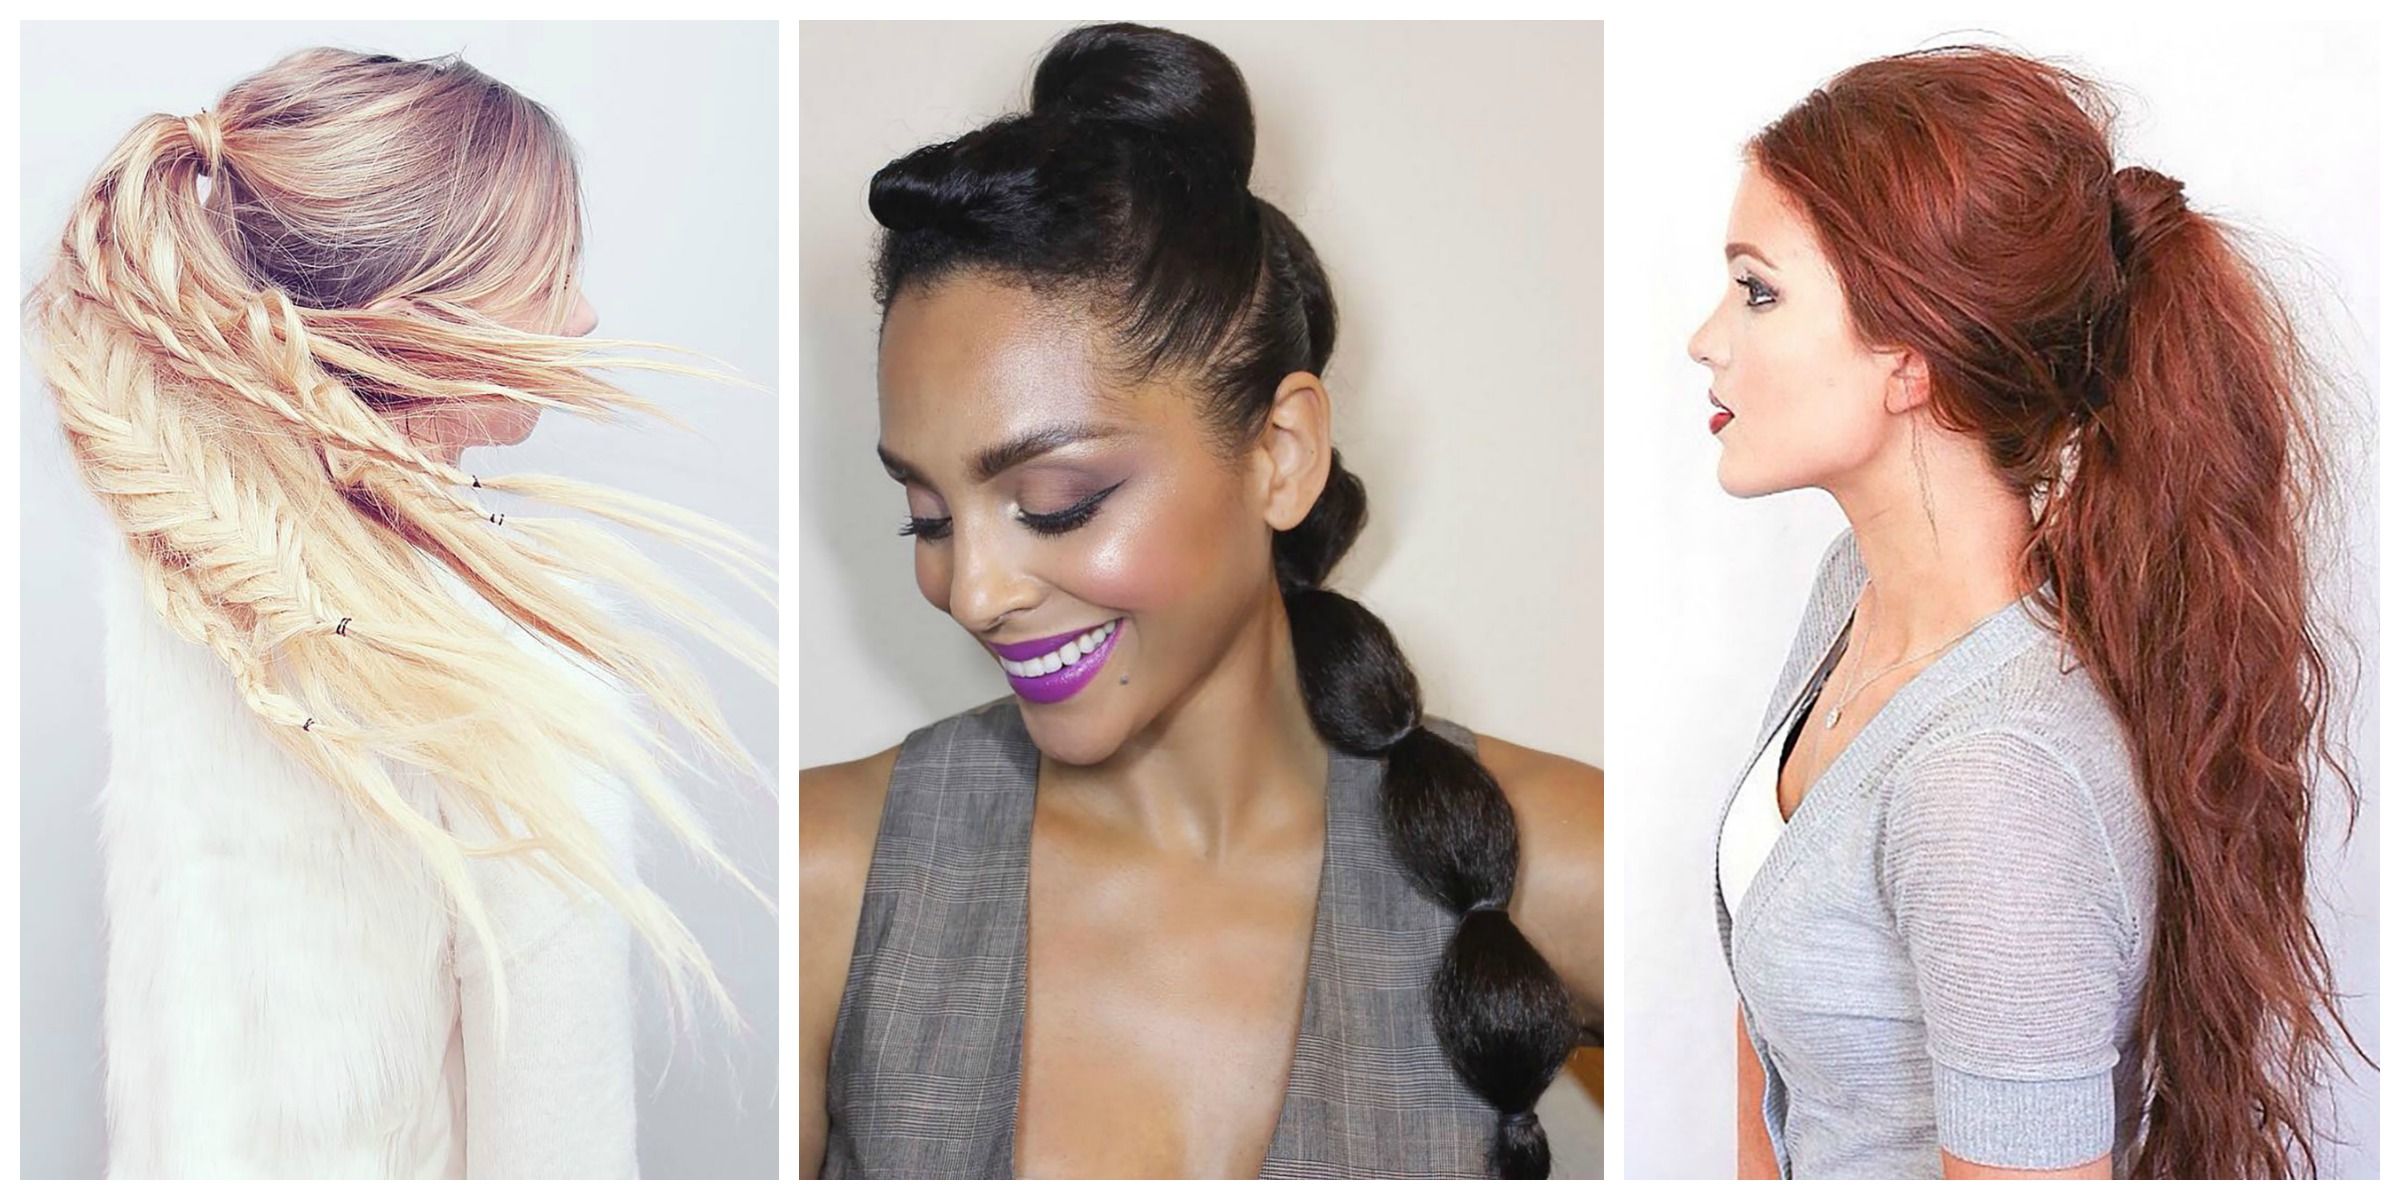 Hair Hacks 3 Ways To Take Your Ponytail to the Next Level  Hair styles  Long hair styles Ponytail hairstyles